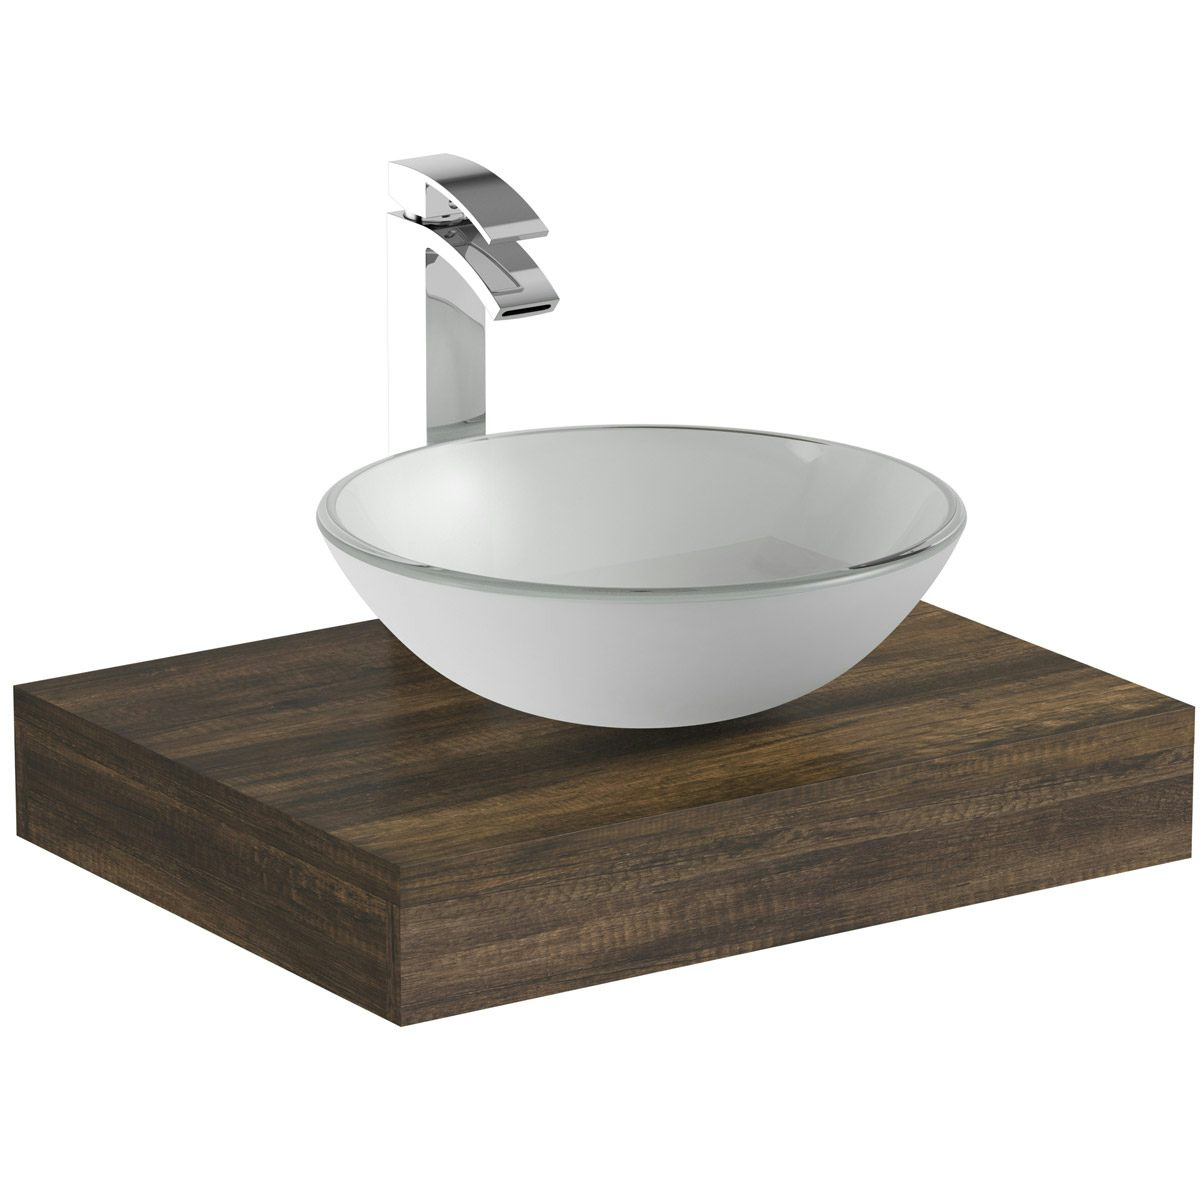 The Bath Co. Dalston countertop shelf 600mm with Mackintosh white glass countertop basin, tap and waste